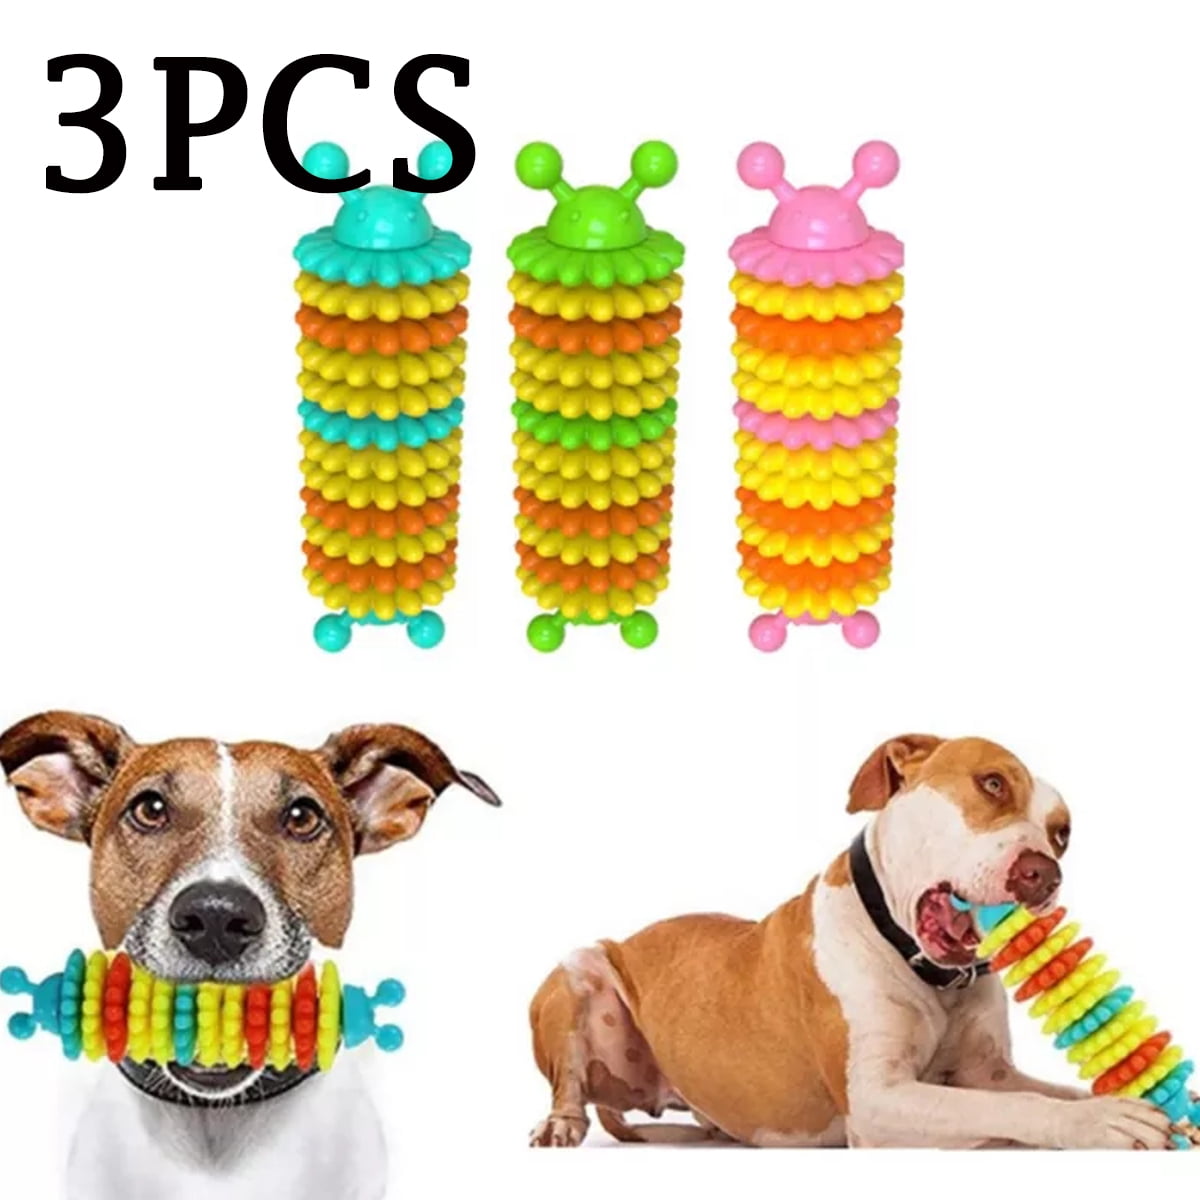 1packs Dog Chew Bone Toy for Aggressive Chewers: Especially Chewy Natural Rubber, Puppy Chew Toy, Durable and Almost Indestructible for Medium and